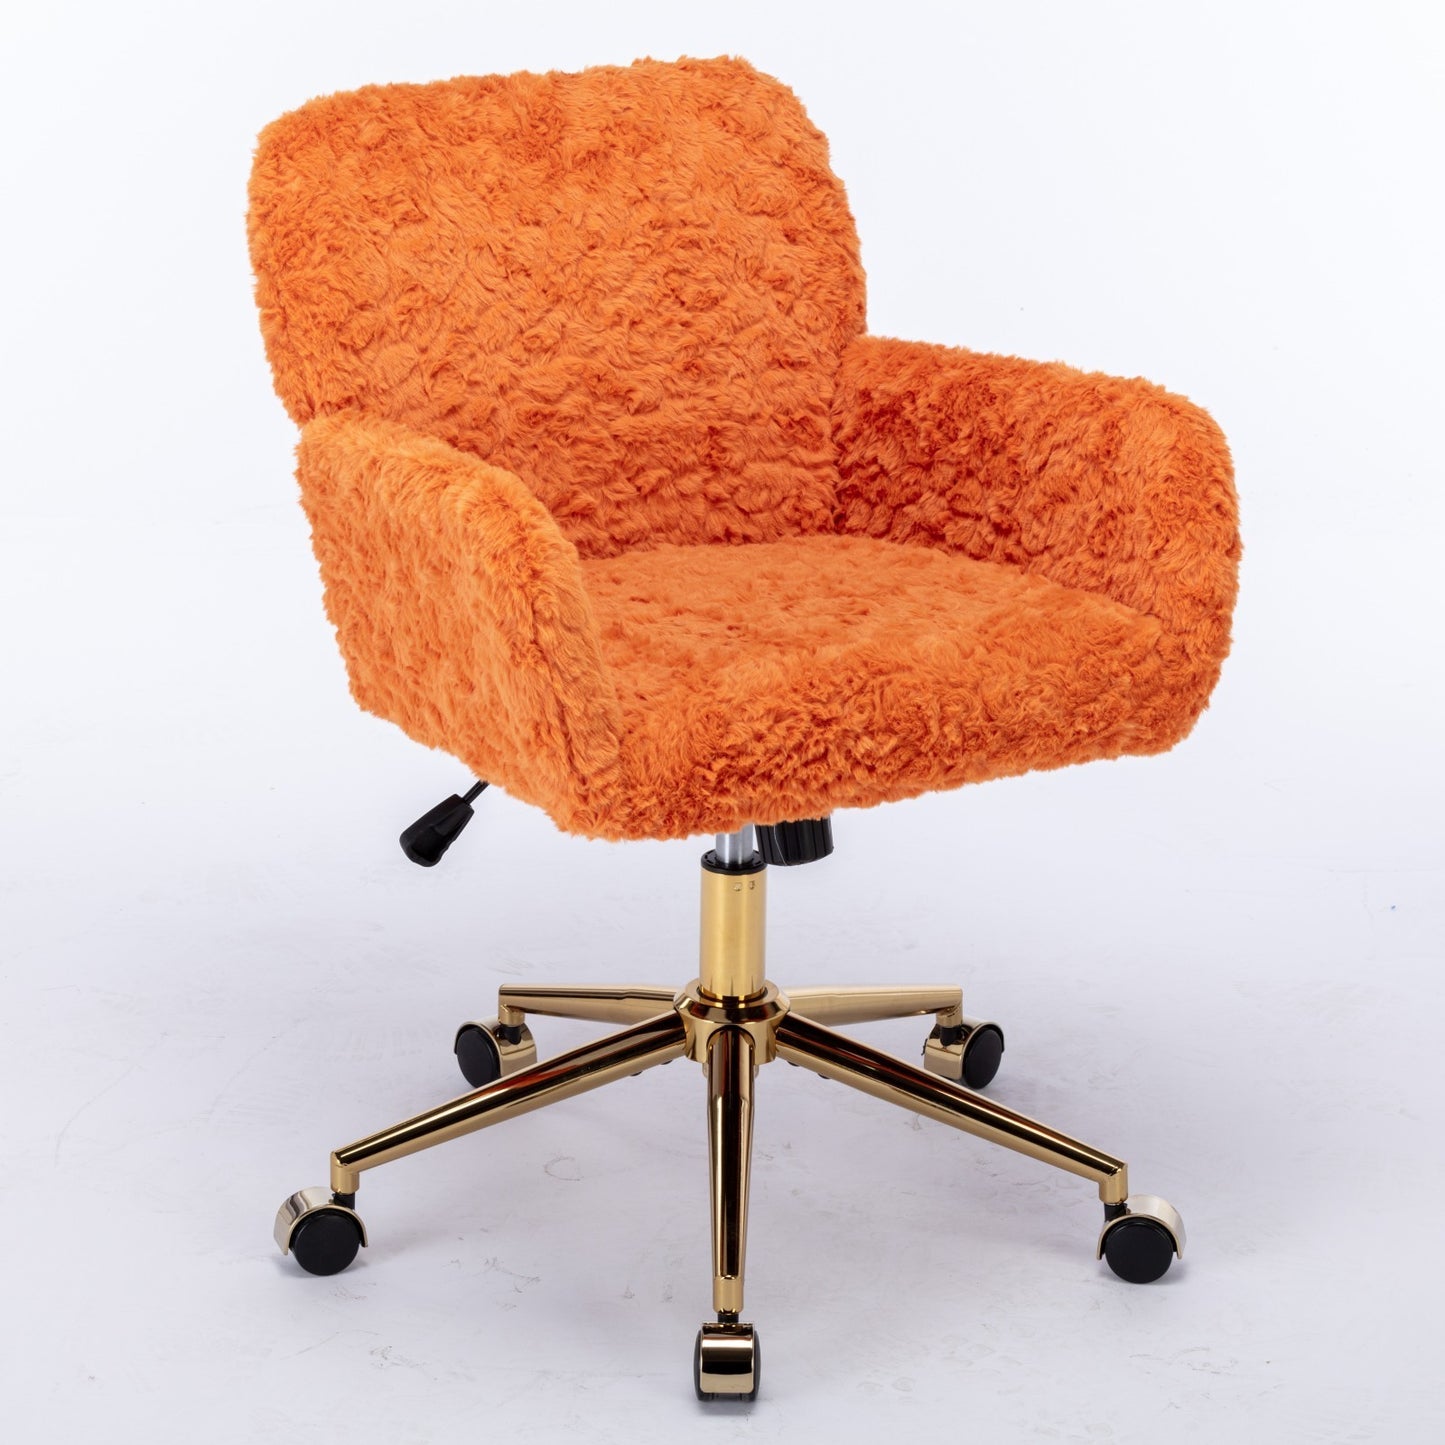 Furniture Office Chair,Artificial rabbit hair Home Office Chair with Golden Metal Base,Adjustable Desk Chair Swivel Office Chair,Vanity Chair(Orange)